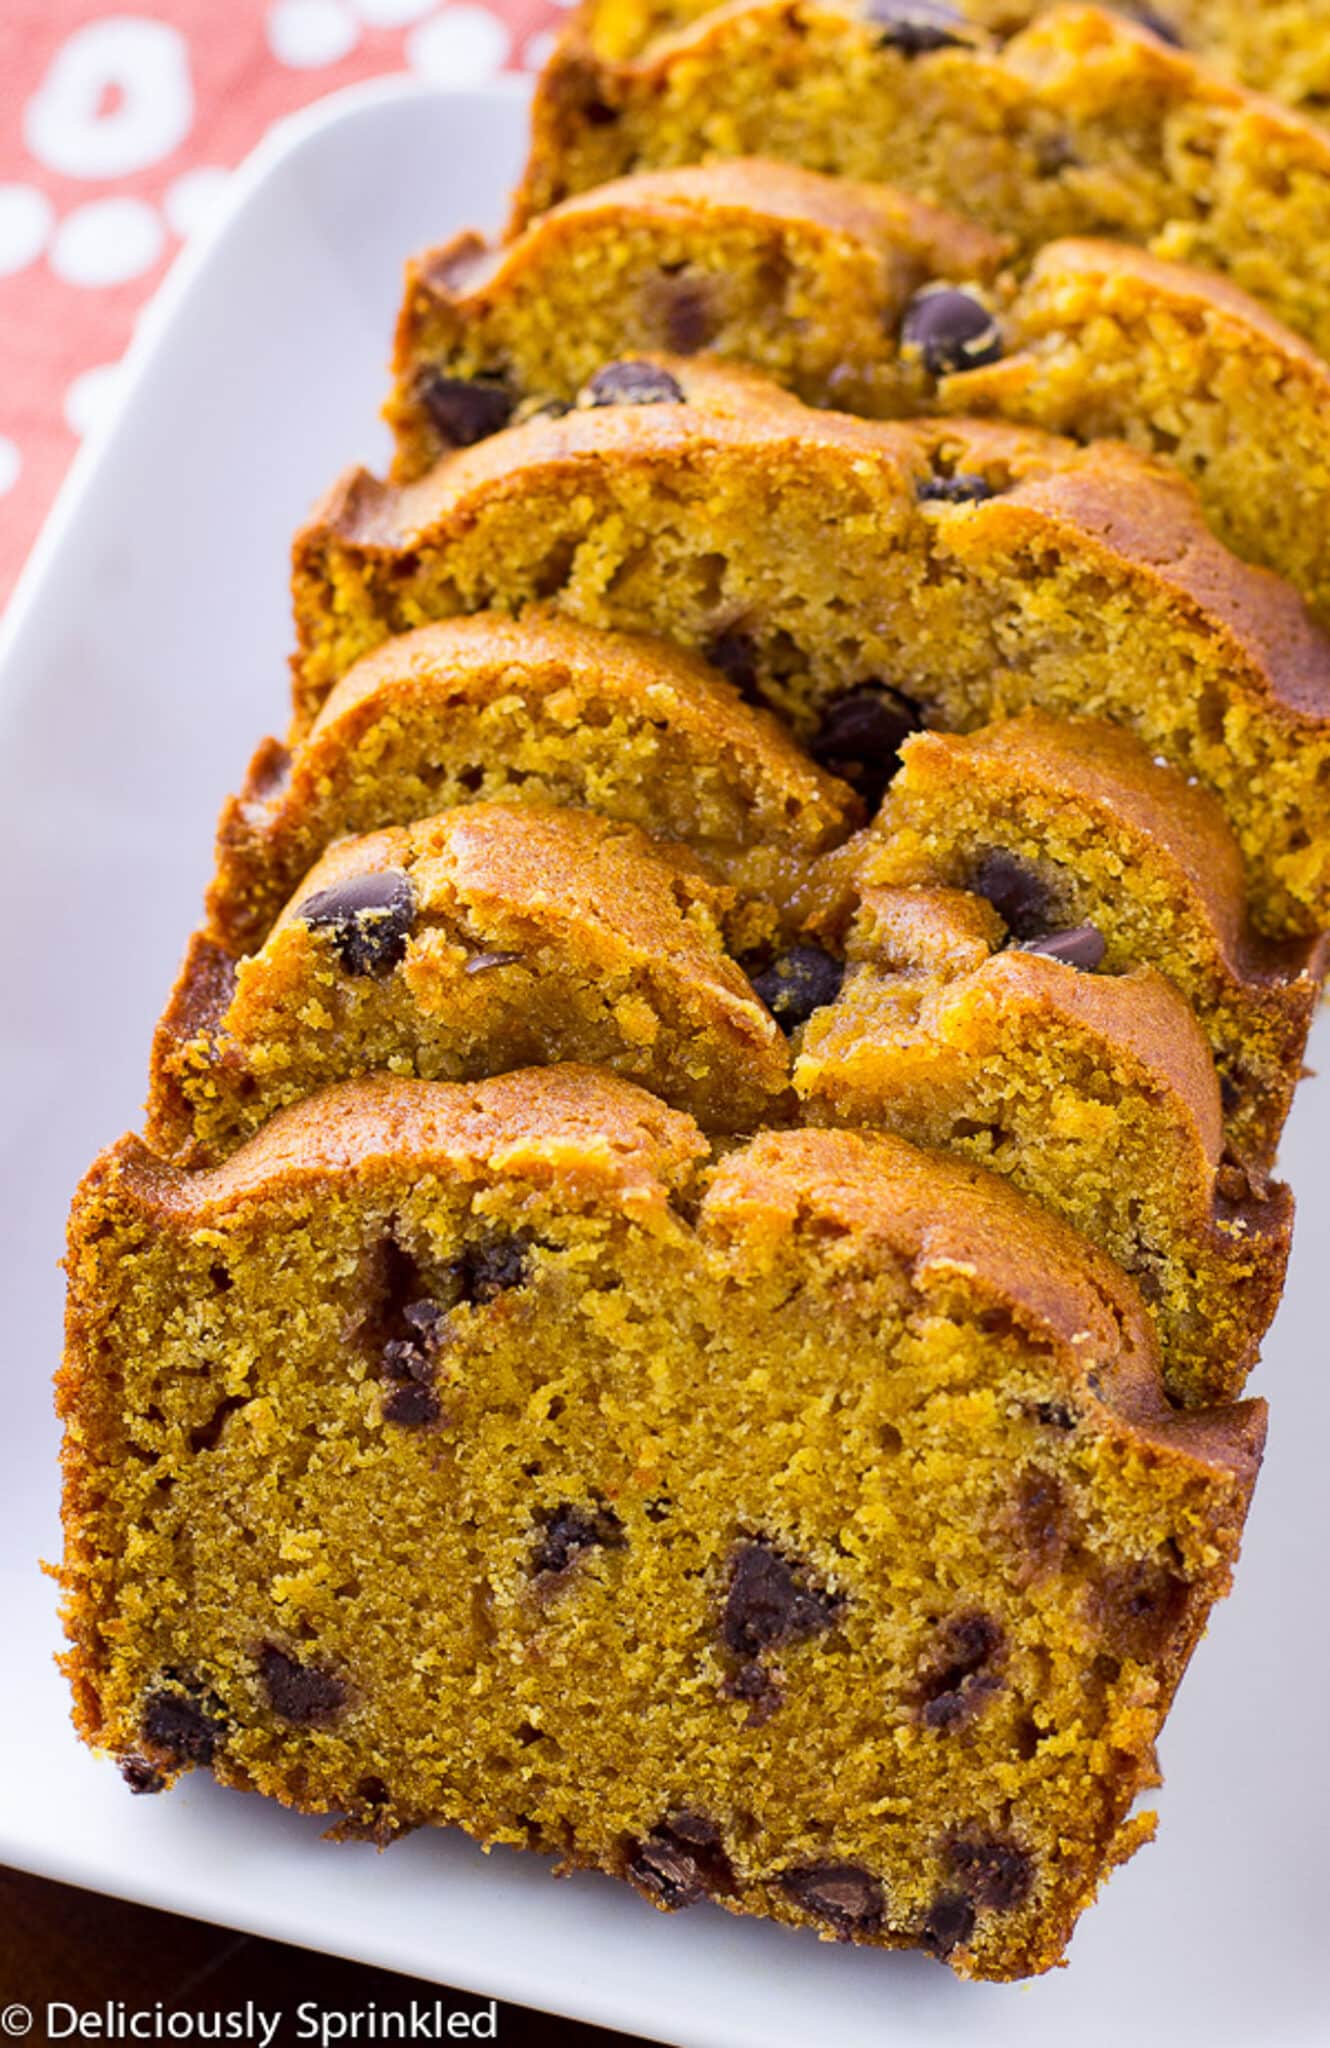 Pumpkin bread with chocolate chips sliced and laid out on a white plate on the table.